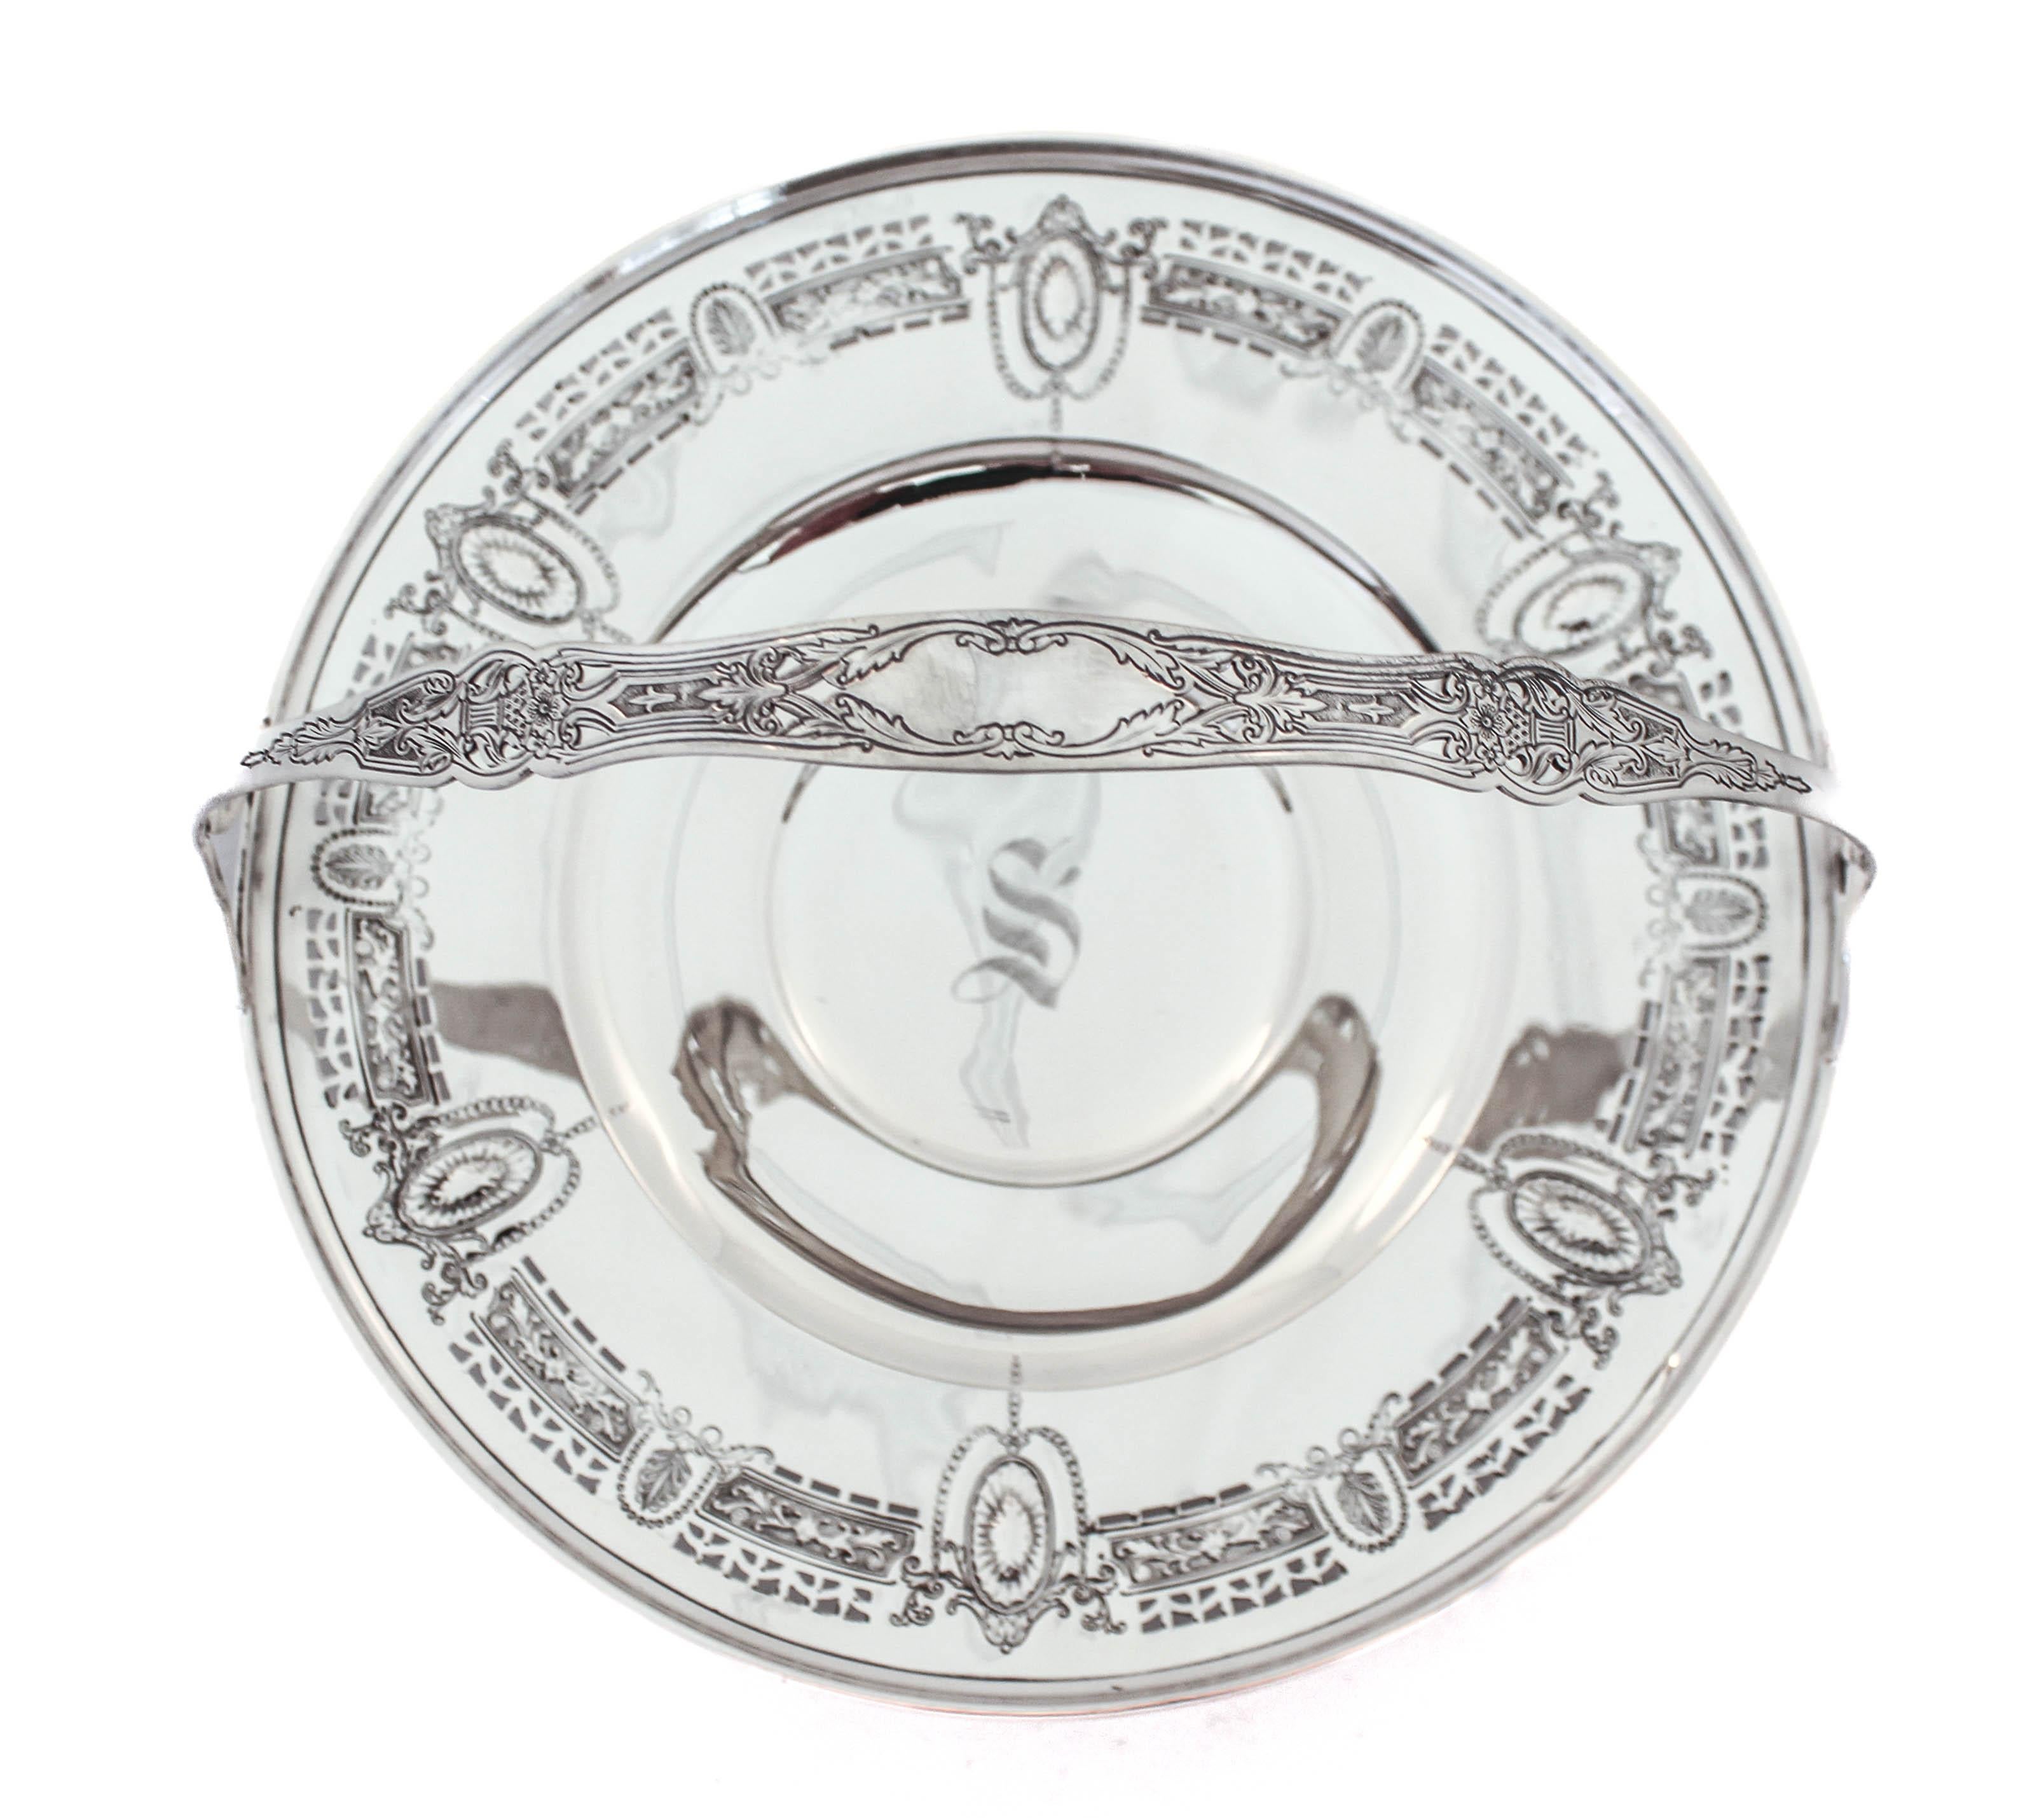 Being offered is a sterling silver basket.  The plate has medallions interspersed with reticulated cutouts.  Old world elegance all around the edge.  The handle has an etched design of floral bouquets and in the center a cartouche— a space for your